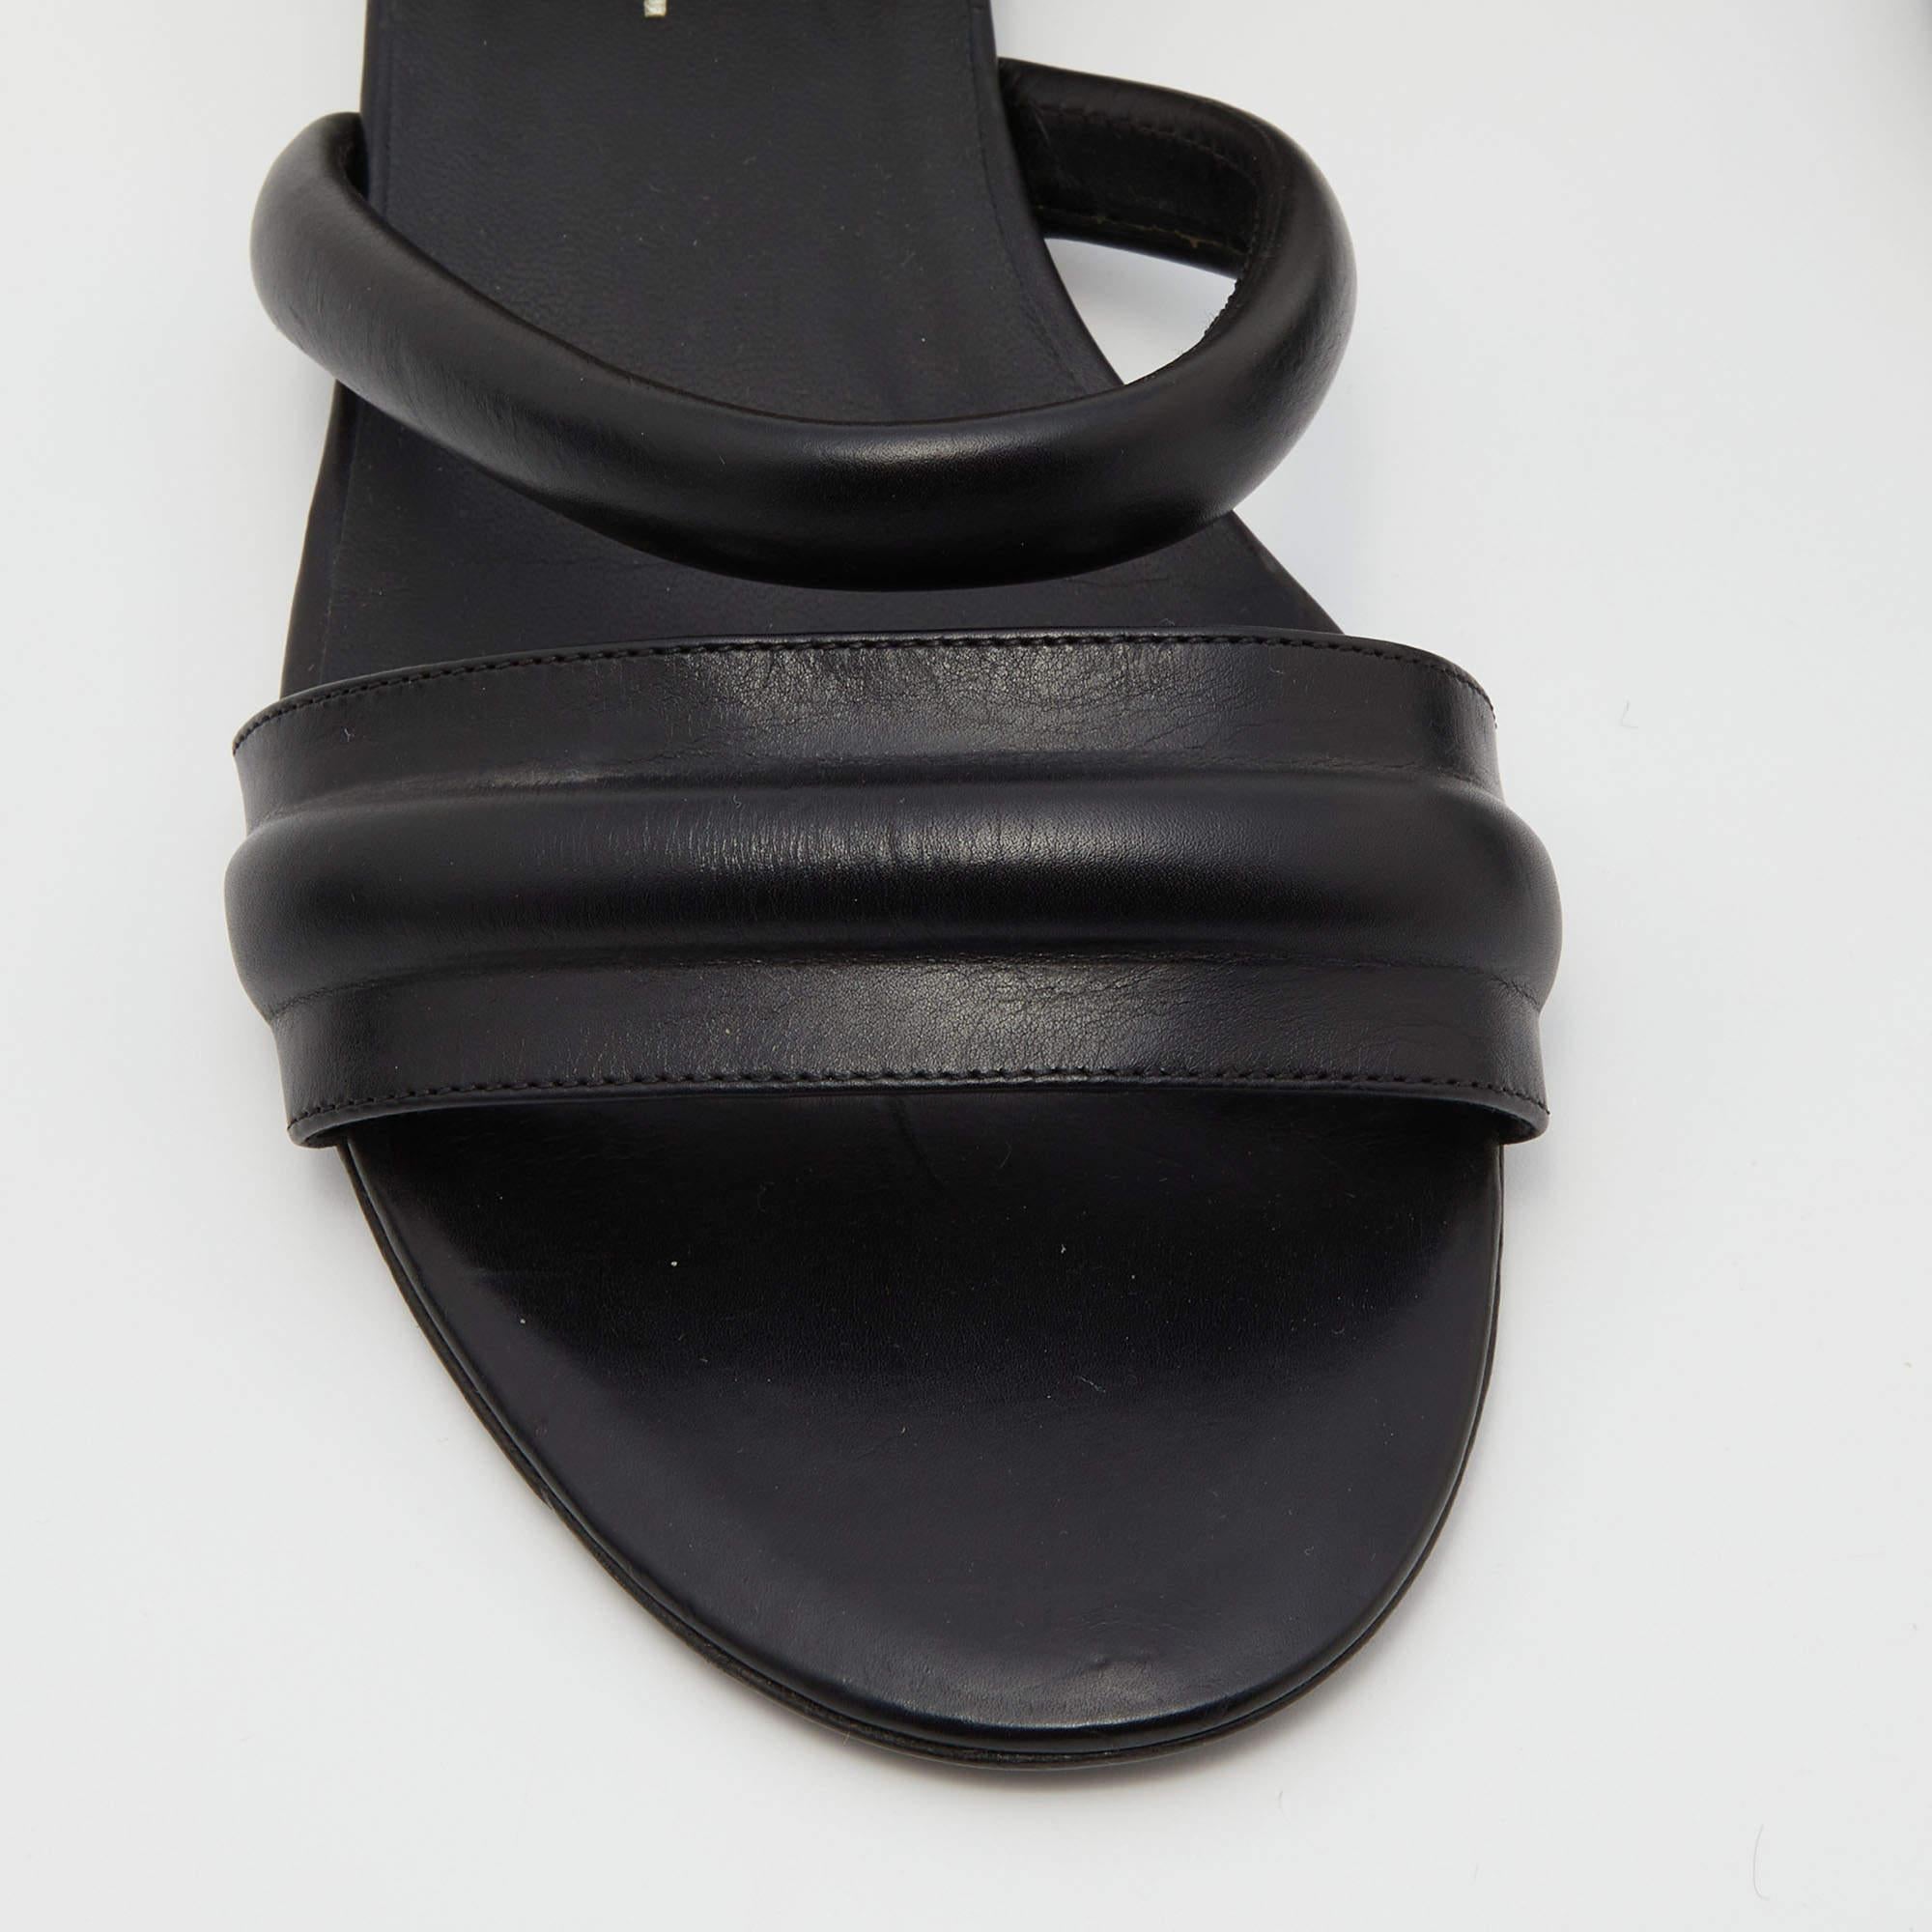 Chanel Black Quilted Leather Embellished Ankle Cuff Flat Sandals Size 38.5 1